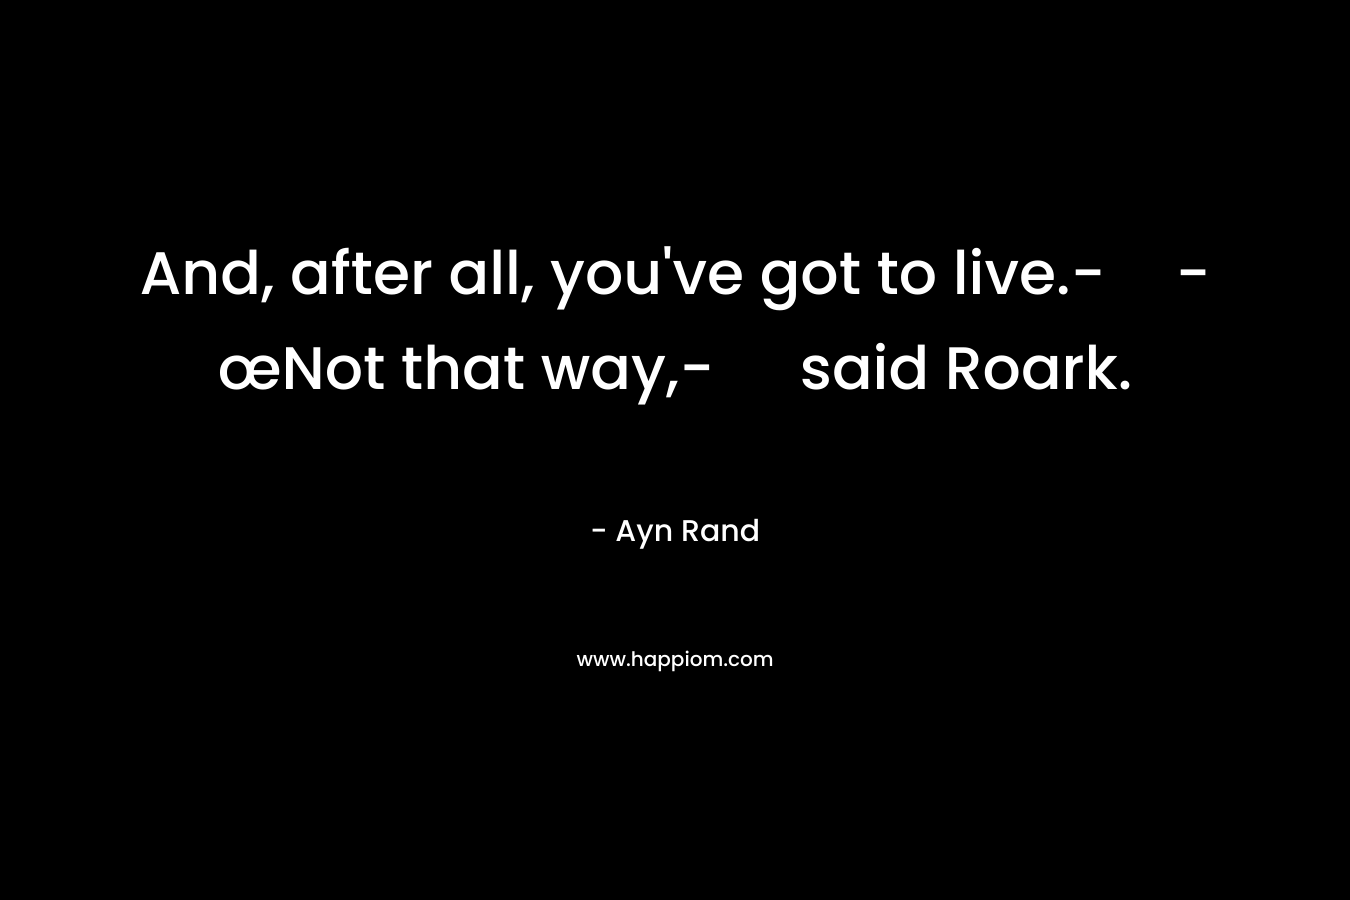 And, after all, you've got to live.--œNot that way,- said Roark.